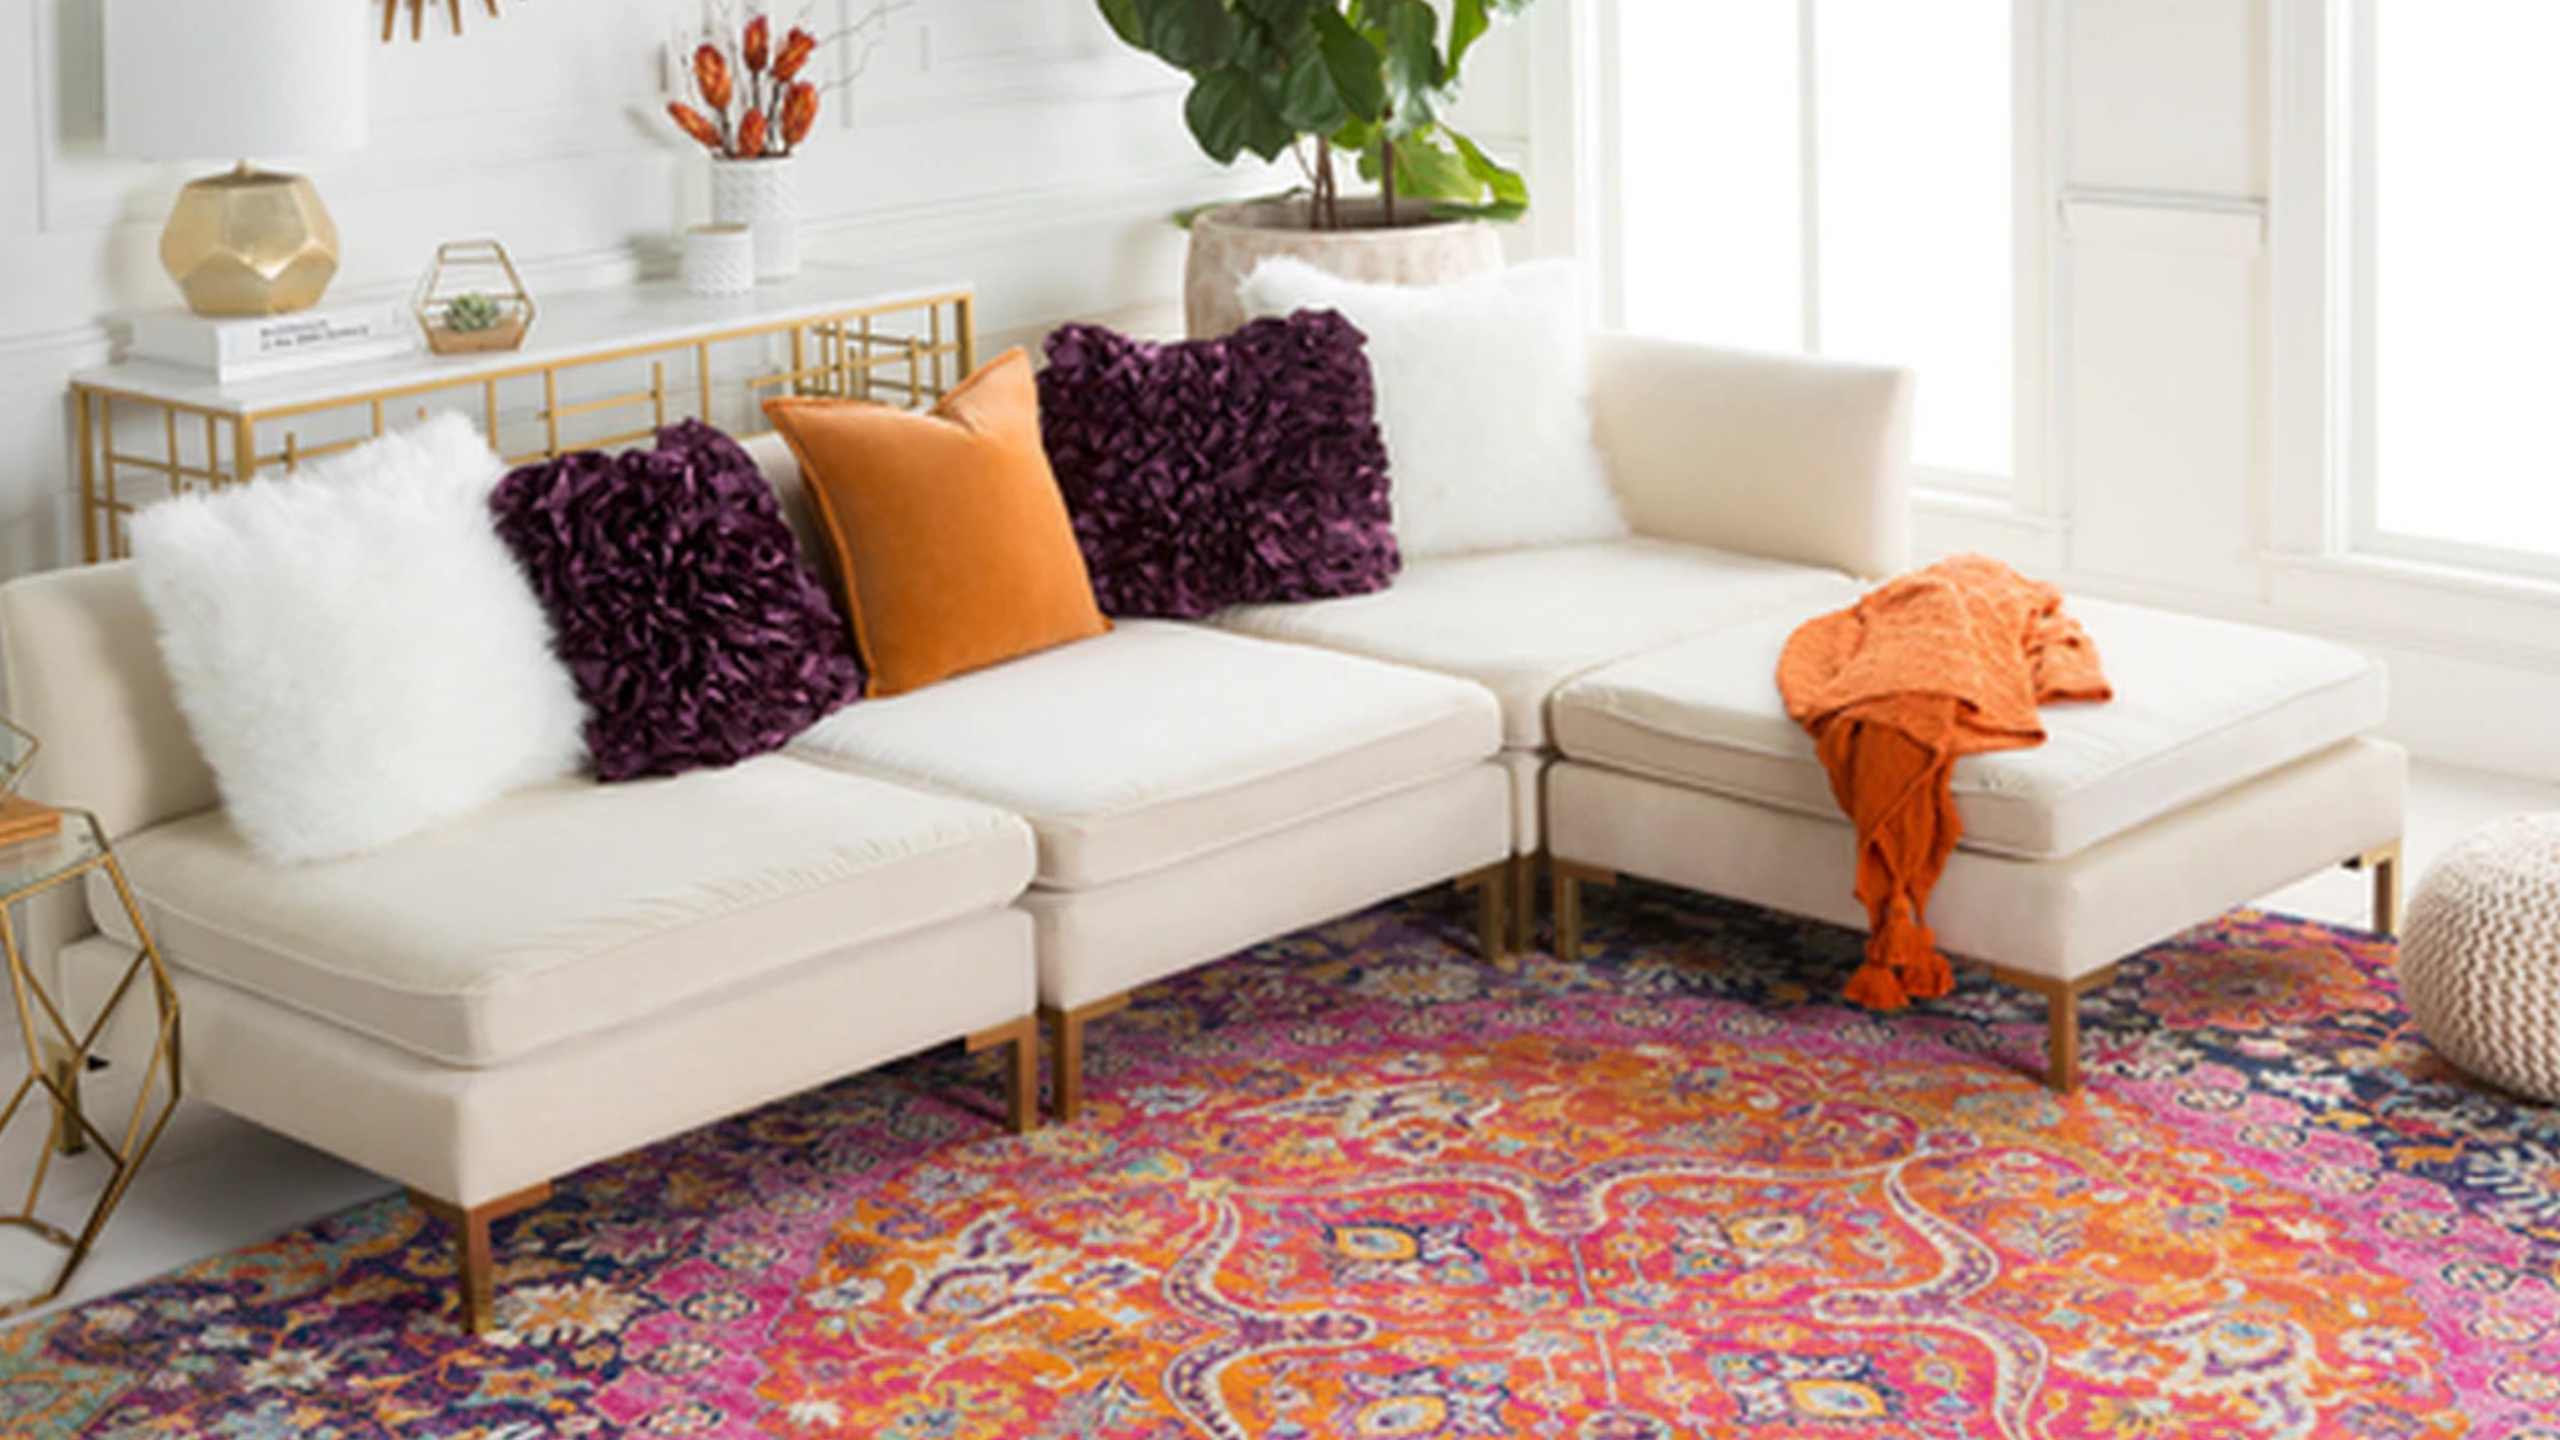 5 Stunning Area Rug Ideas To Upgrade, Images Of Living Rooms With Area Rugs